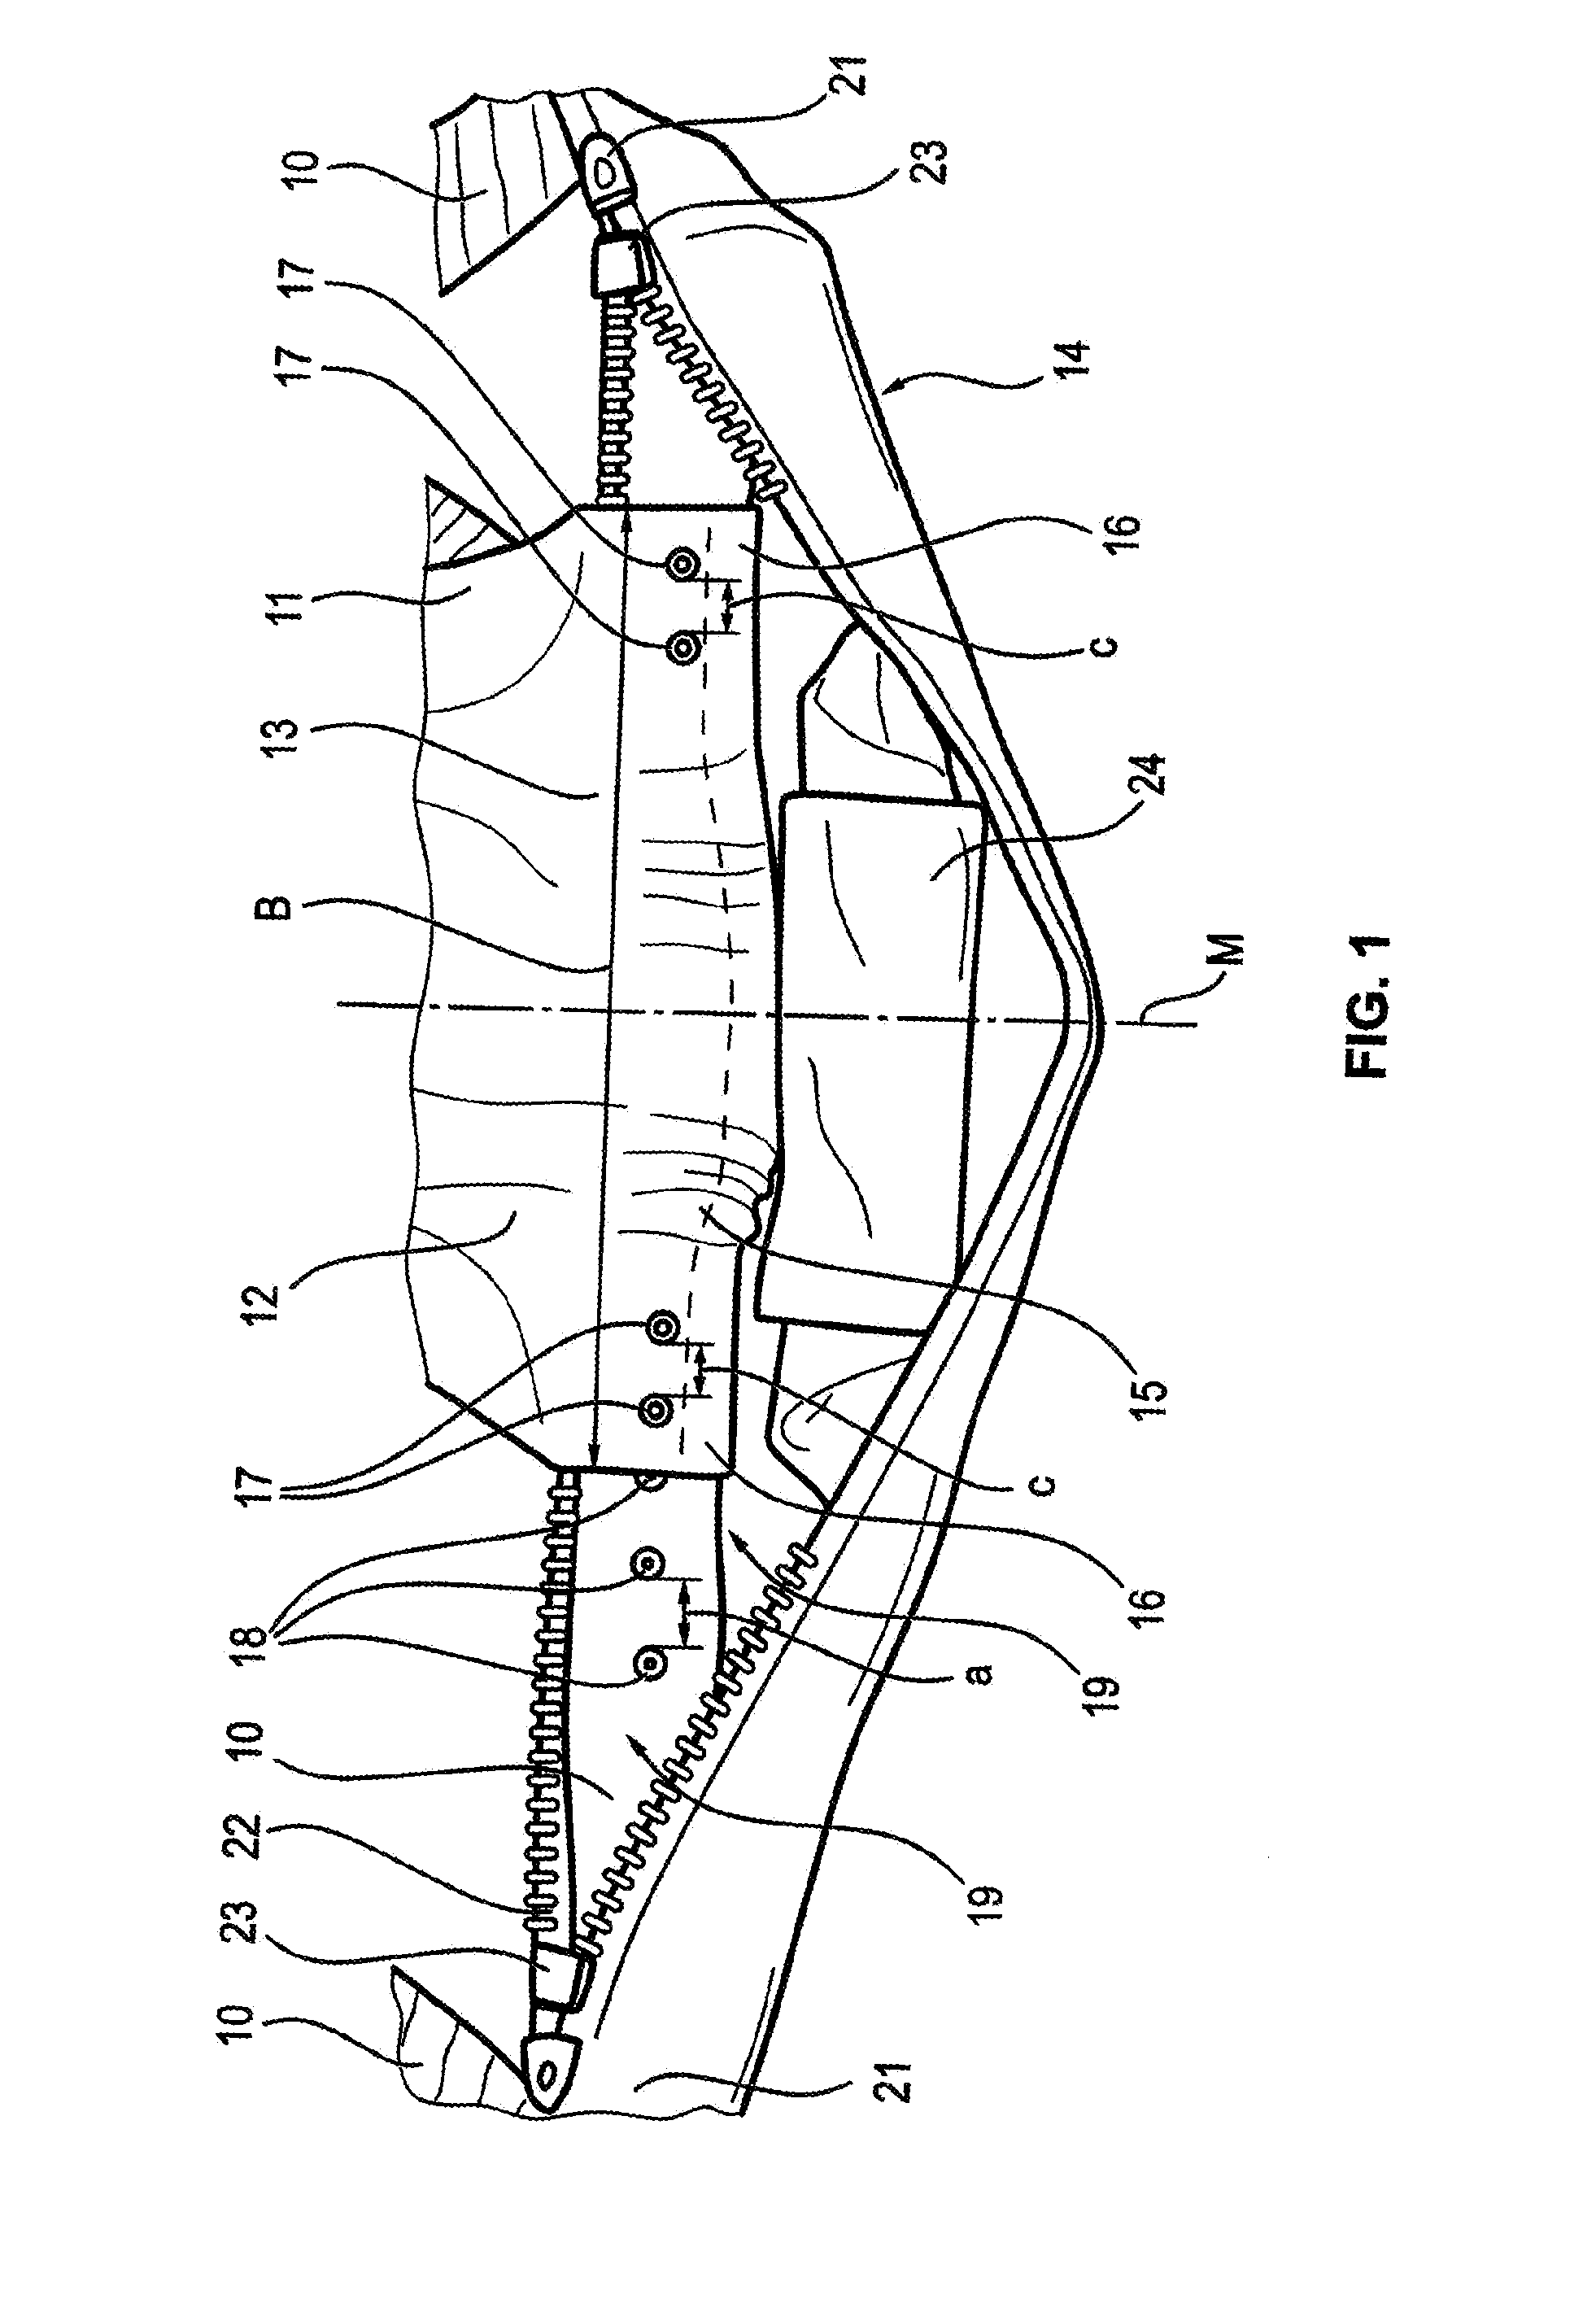 Carrying device for a baby or small child